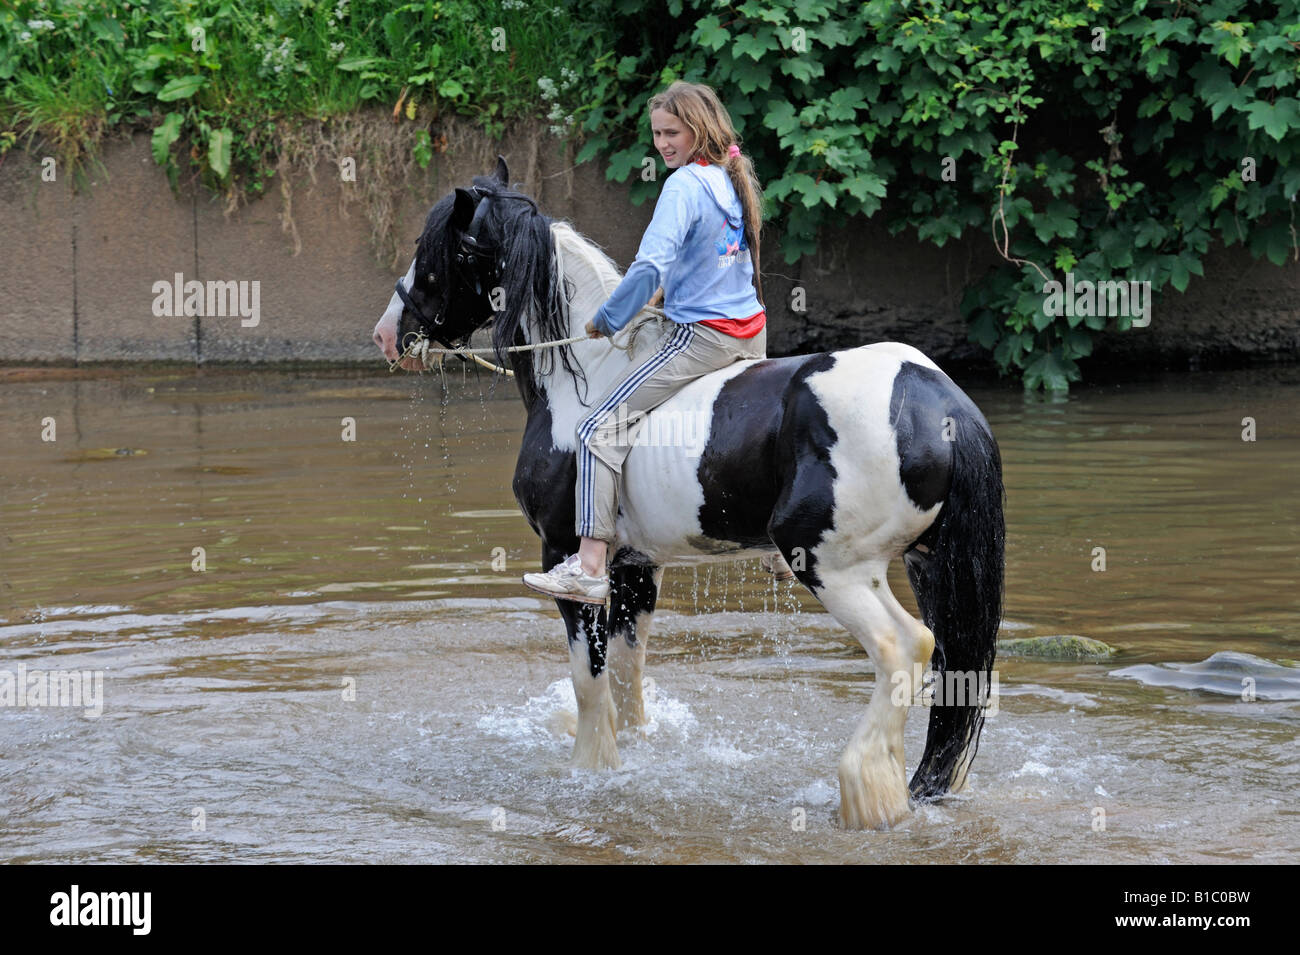 Gypsy traveller girl riding horse in River Eden. Appleby Horse Fair. Appleby-in-Westmorland, Cumbria, England, United Kingdom. Stock Photo